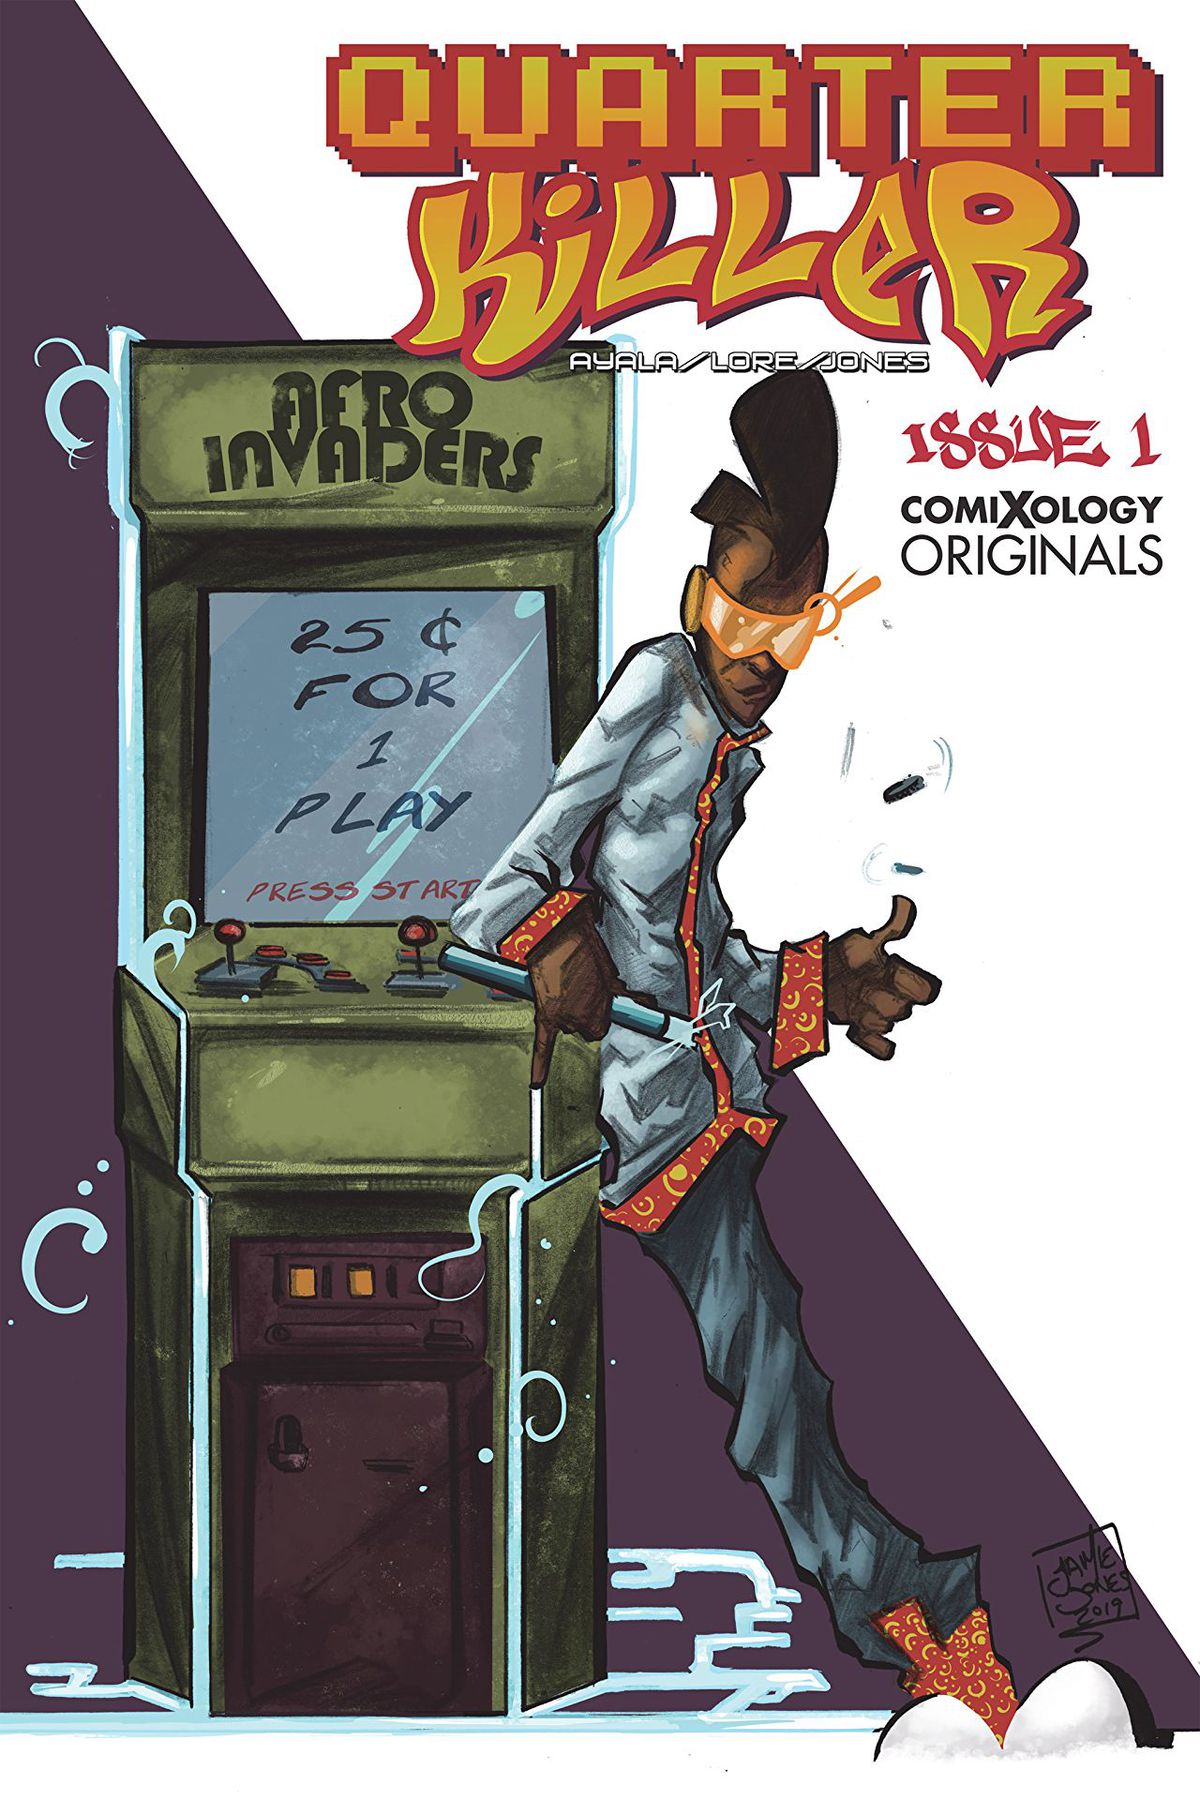 The cover image for Quarter Killer, with a young person at an arcade machine